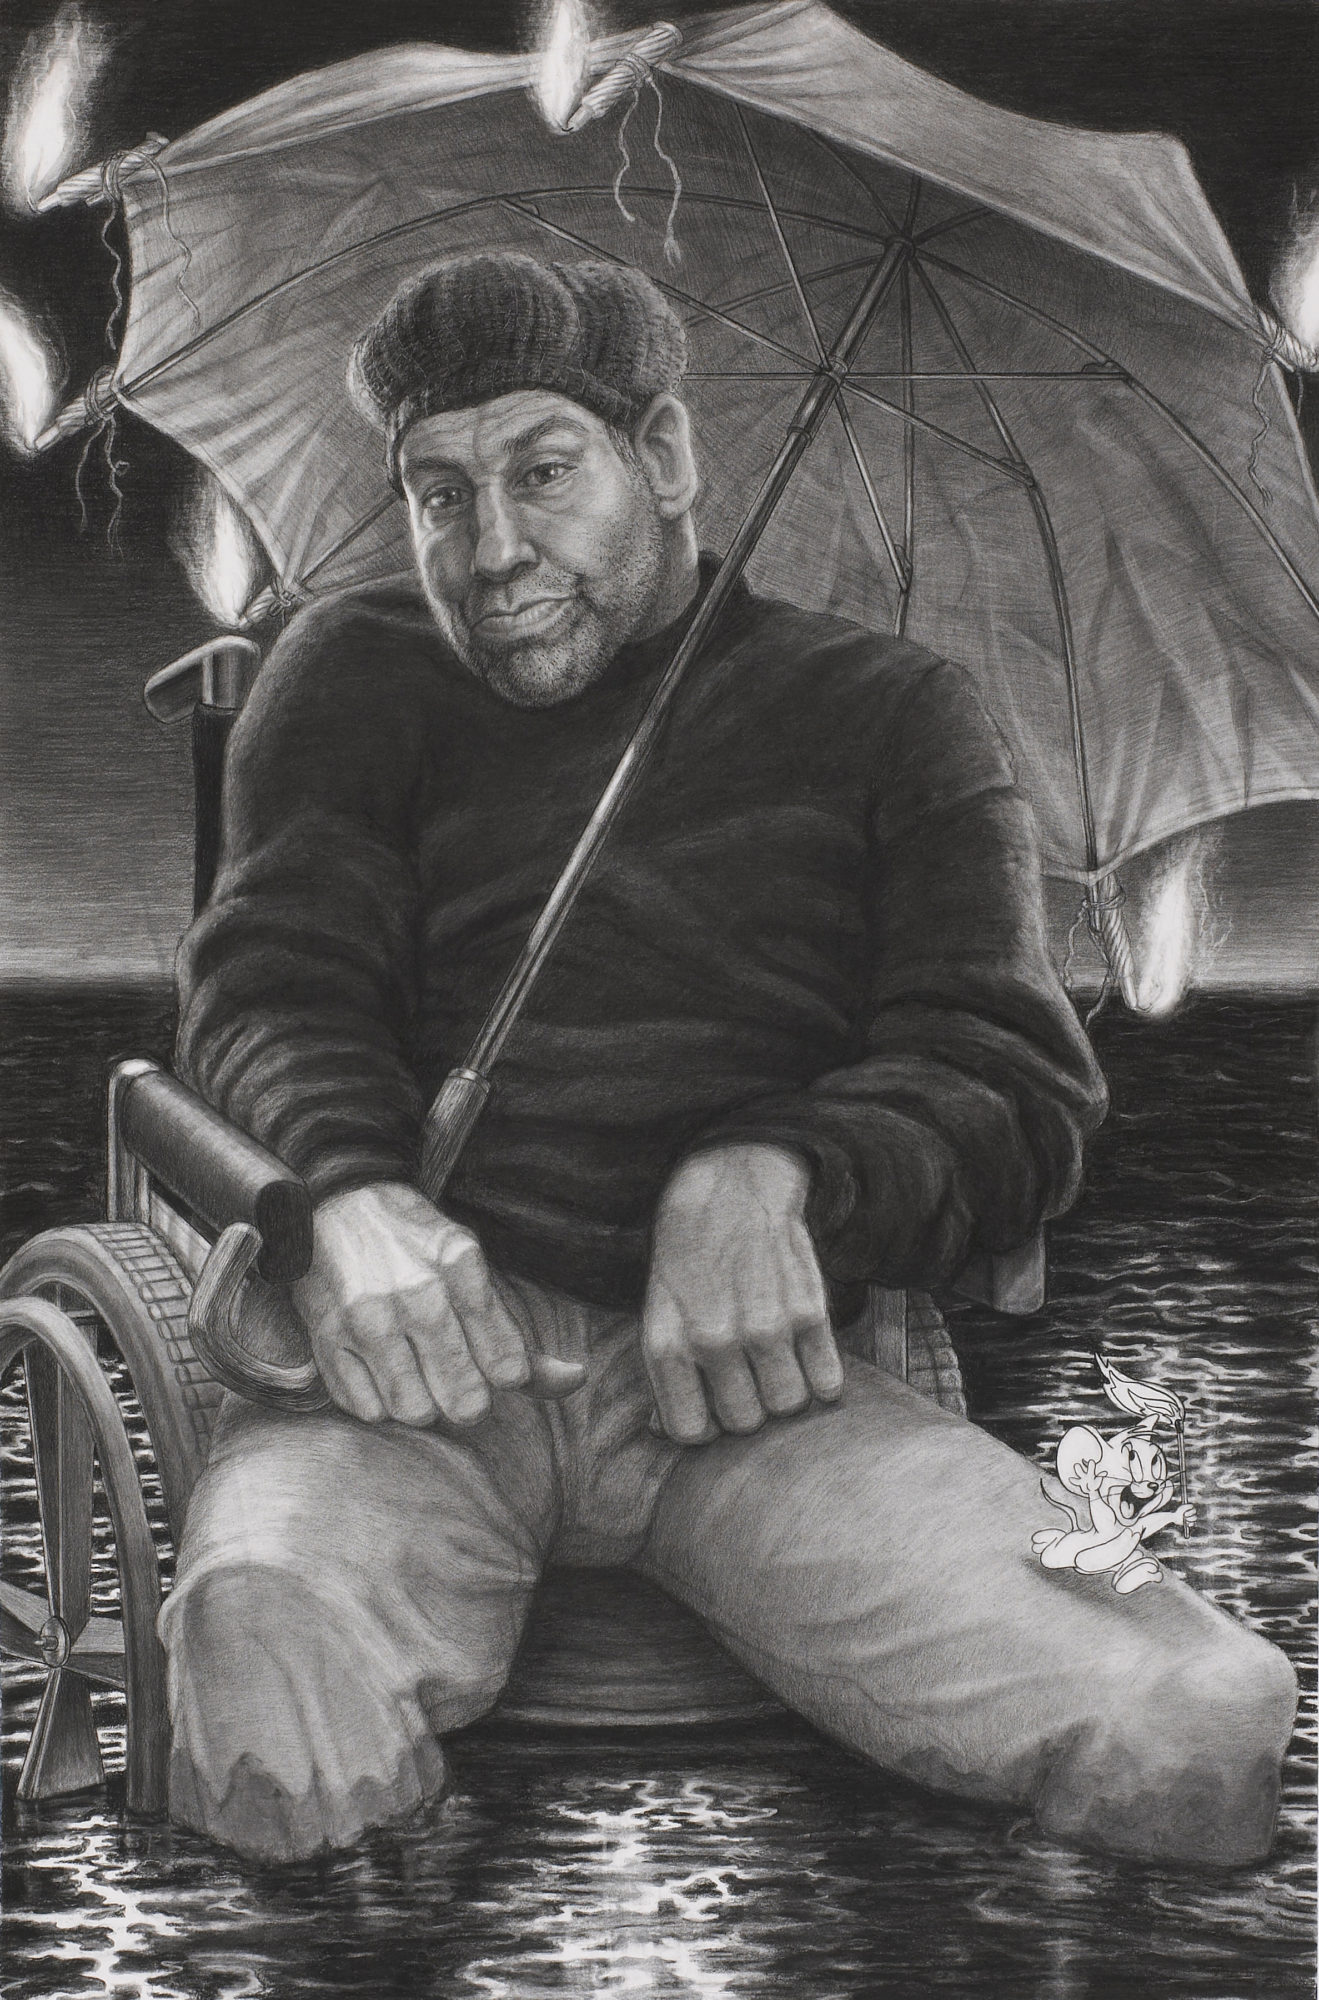 black and white drawing of a man sitting in a wheelchair slightly posed, with an umbrella over him while his knees are submerged under water, drawing of jerry the mouse placed on his left thigh